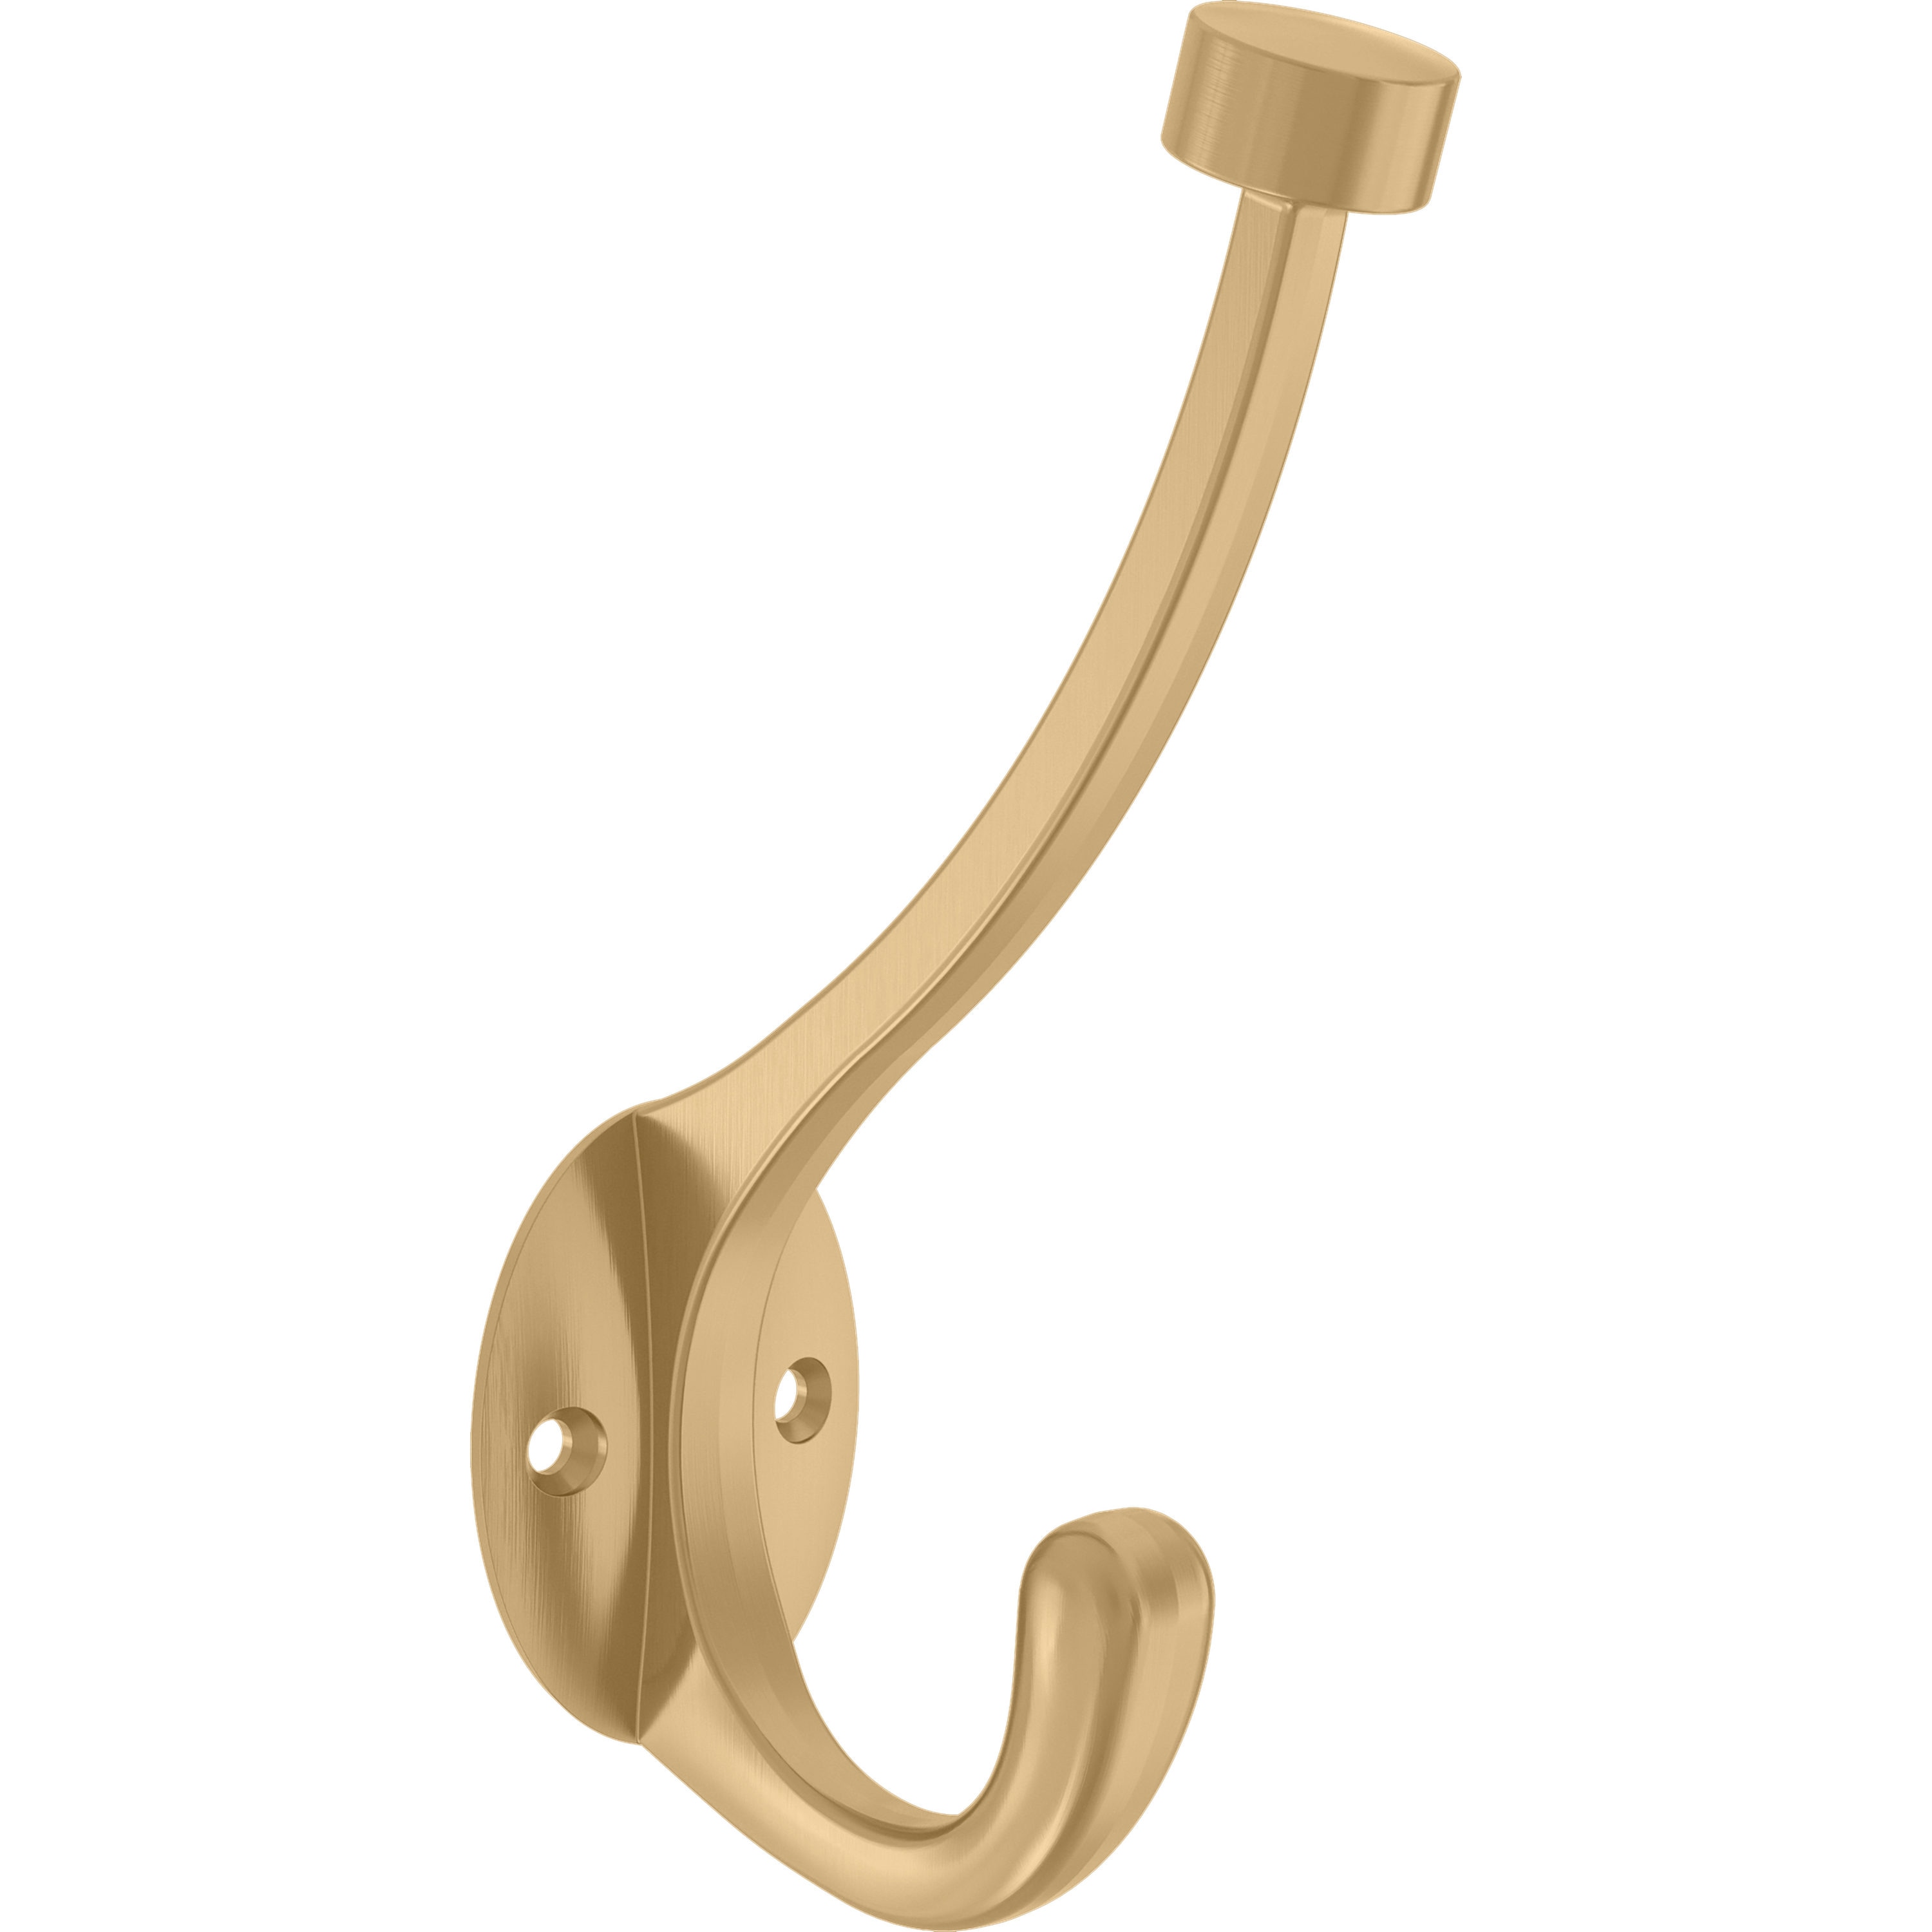 Brass coat with brand On the front, hook fastener bottomfound brass metal,  cast brass coat hook Curve hook with point above collar. Wall plate with  two outstanding ears above the center piece.